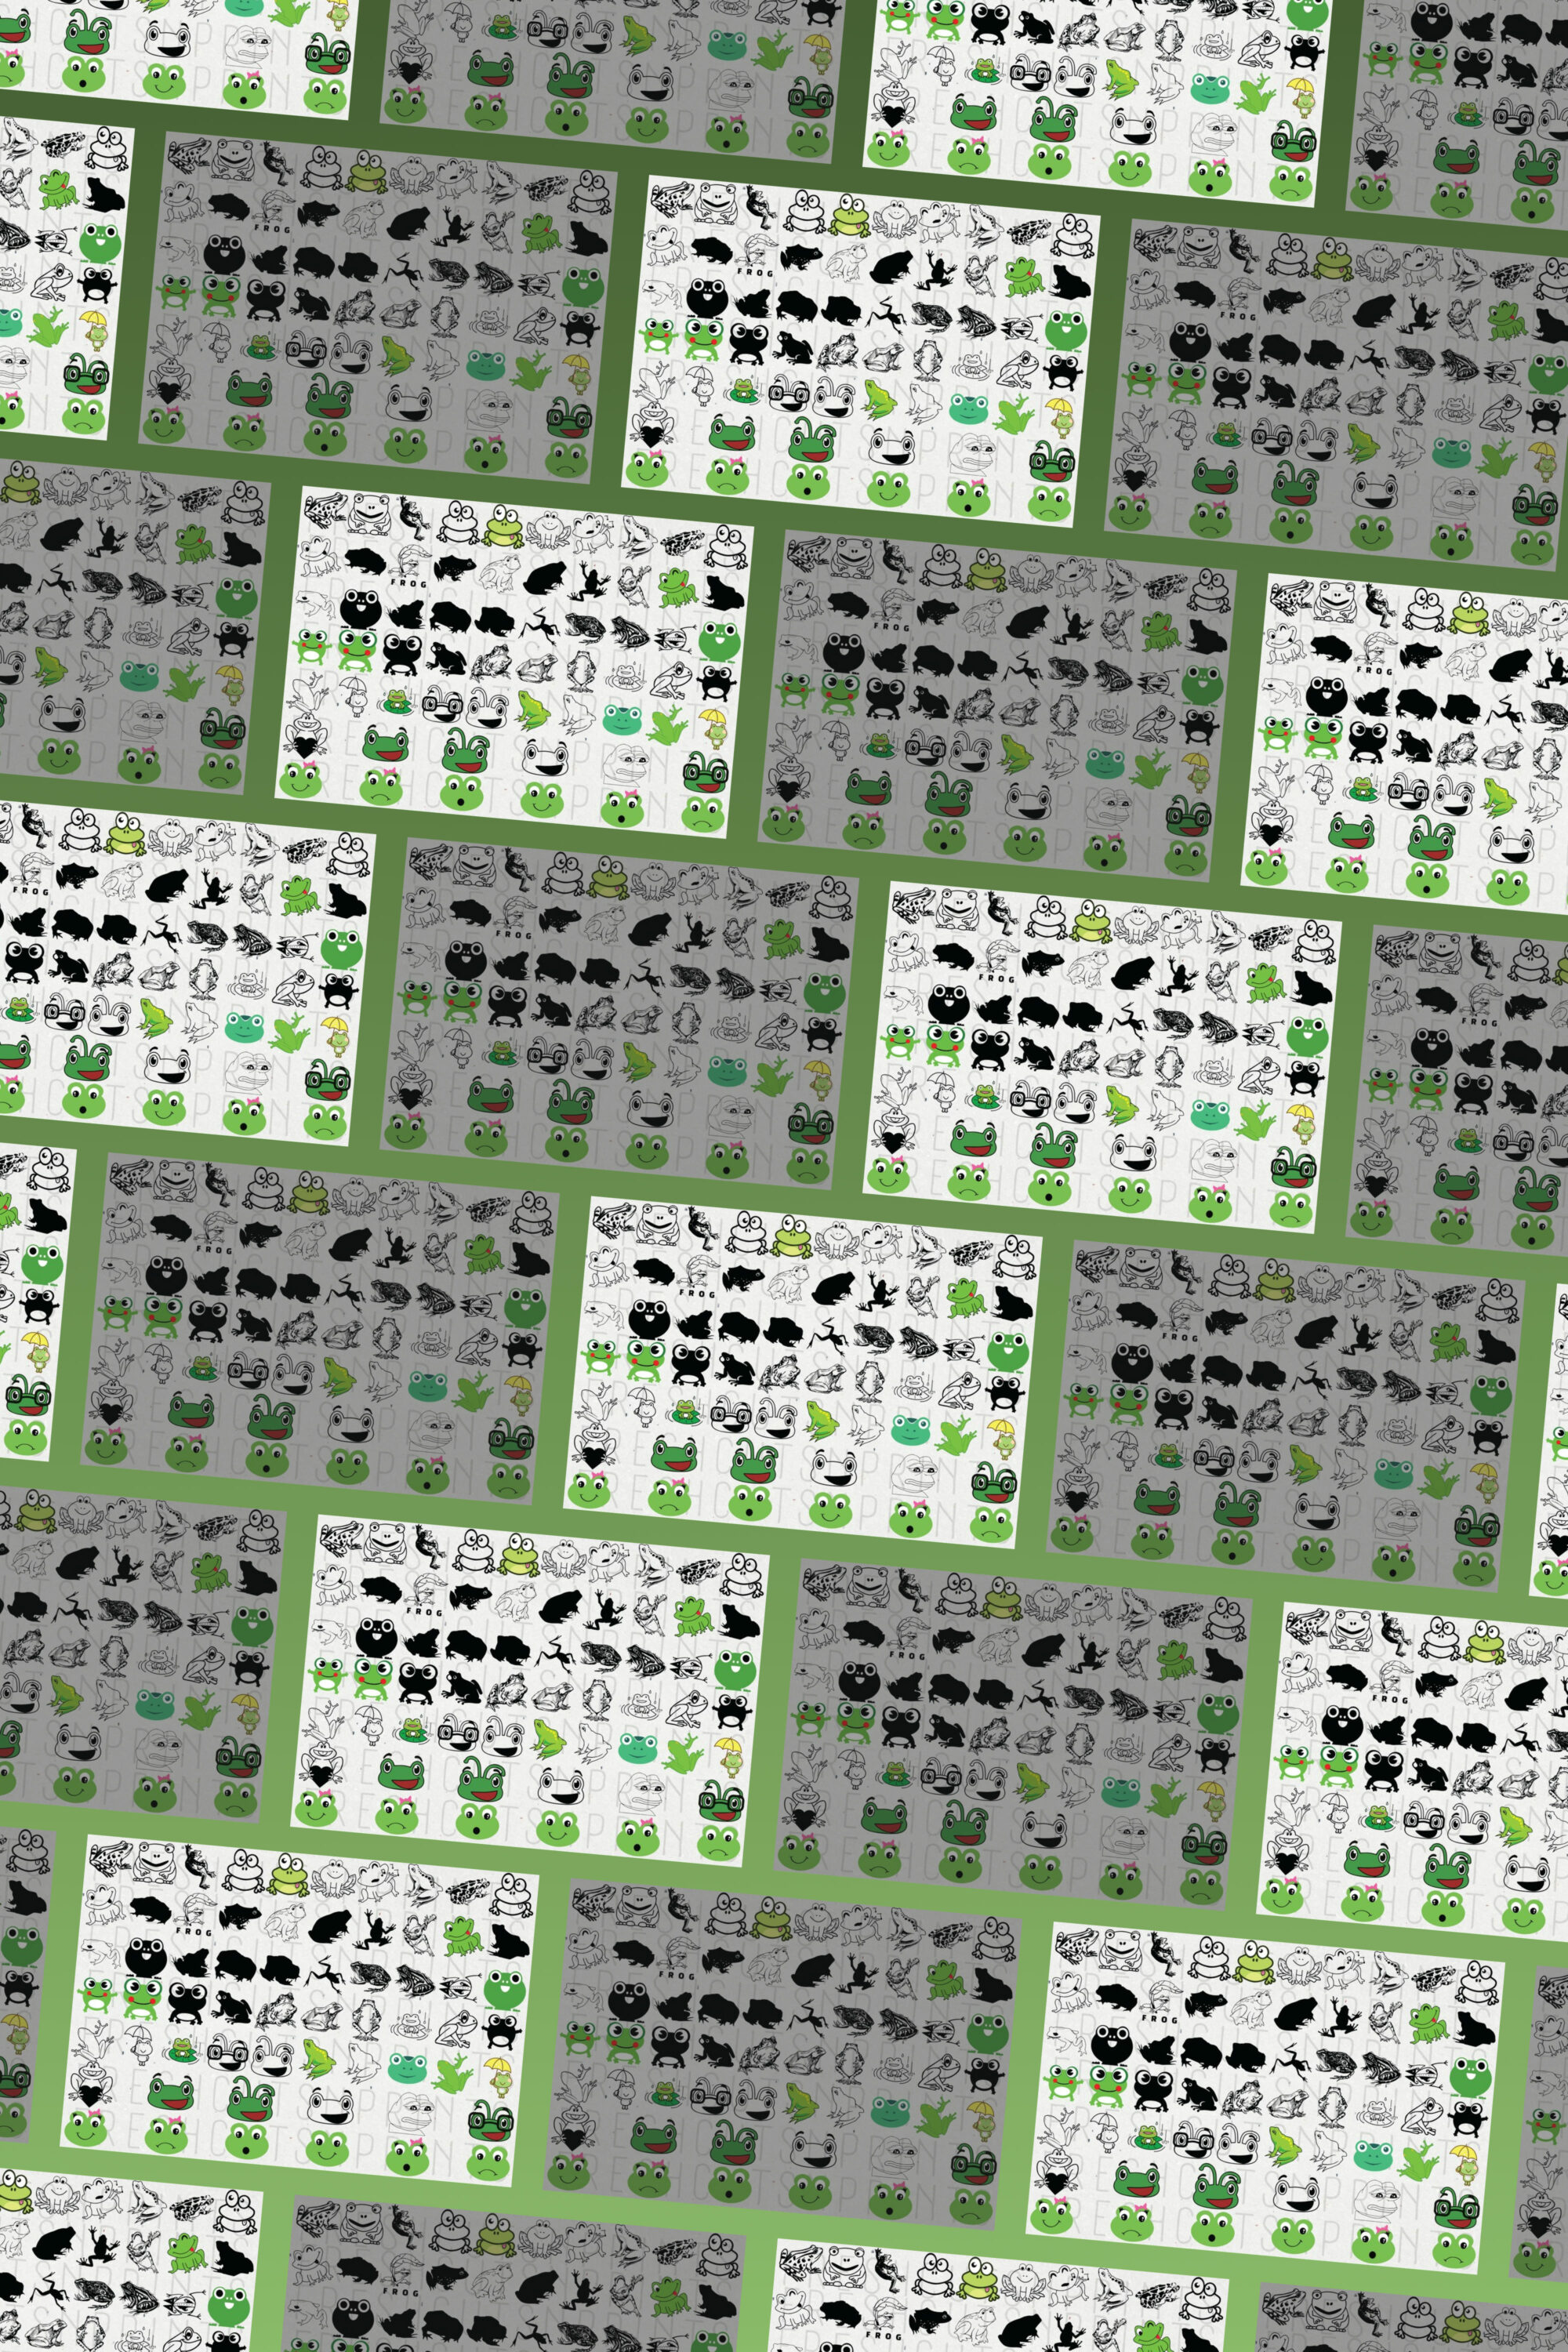 Green and white pattern with a lot of black and white objects.